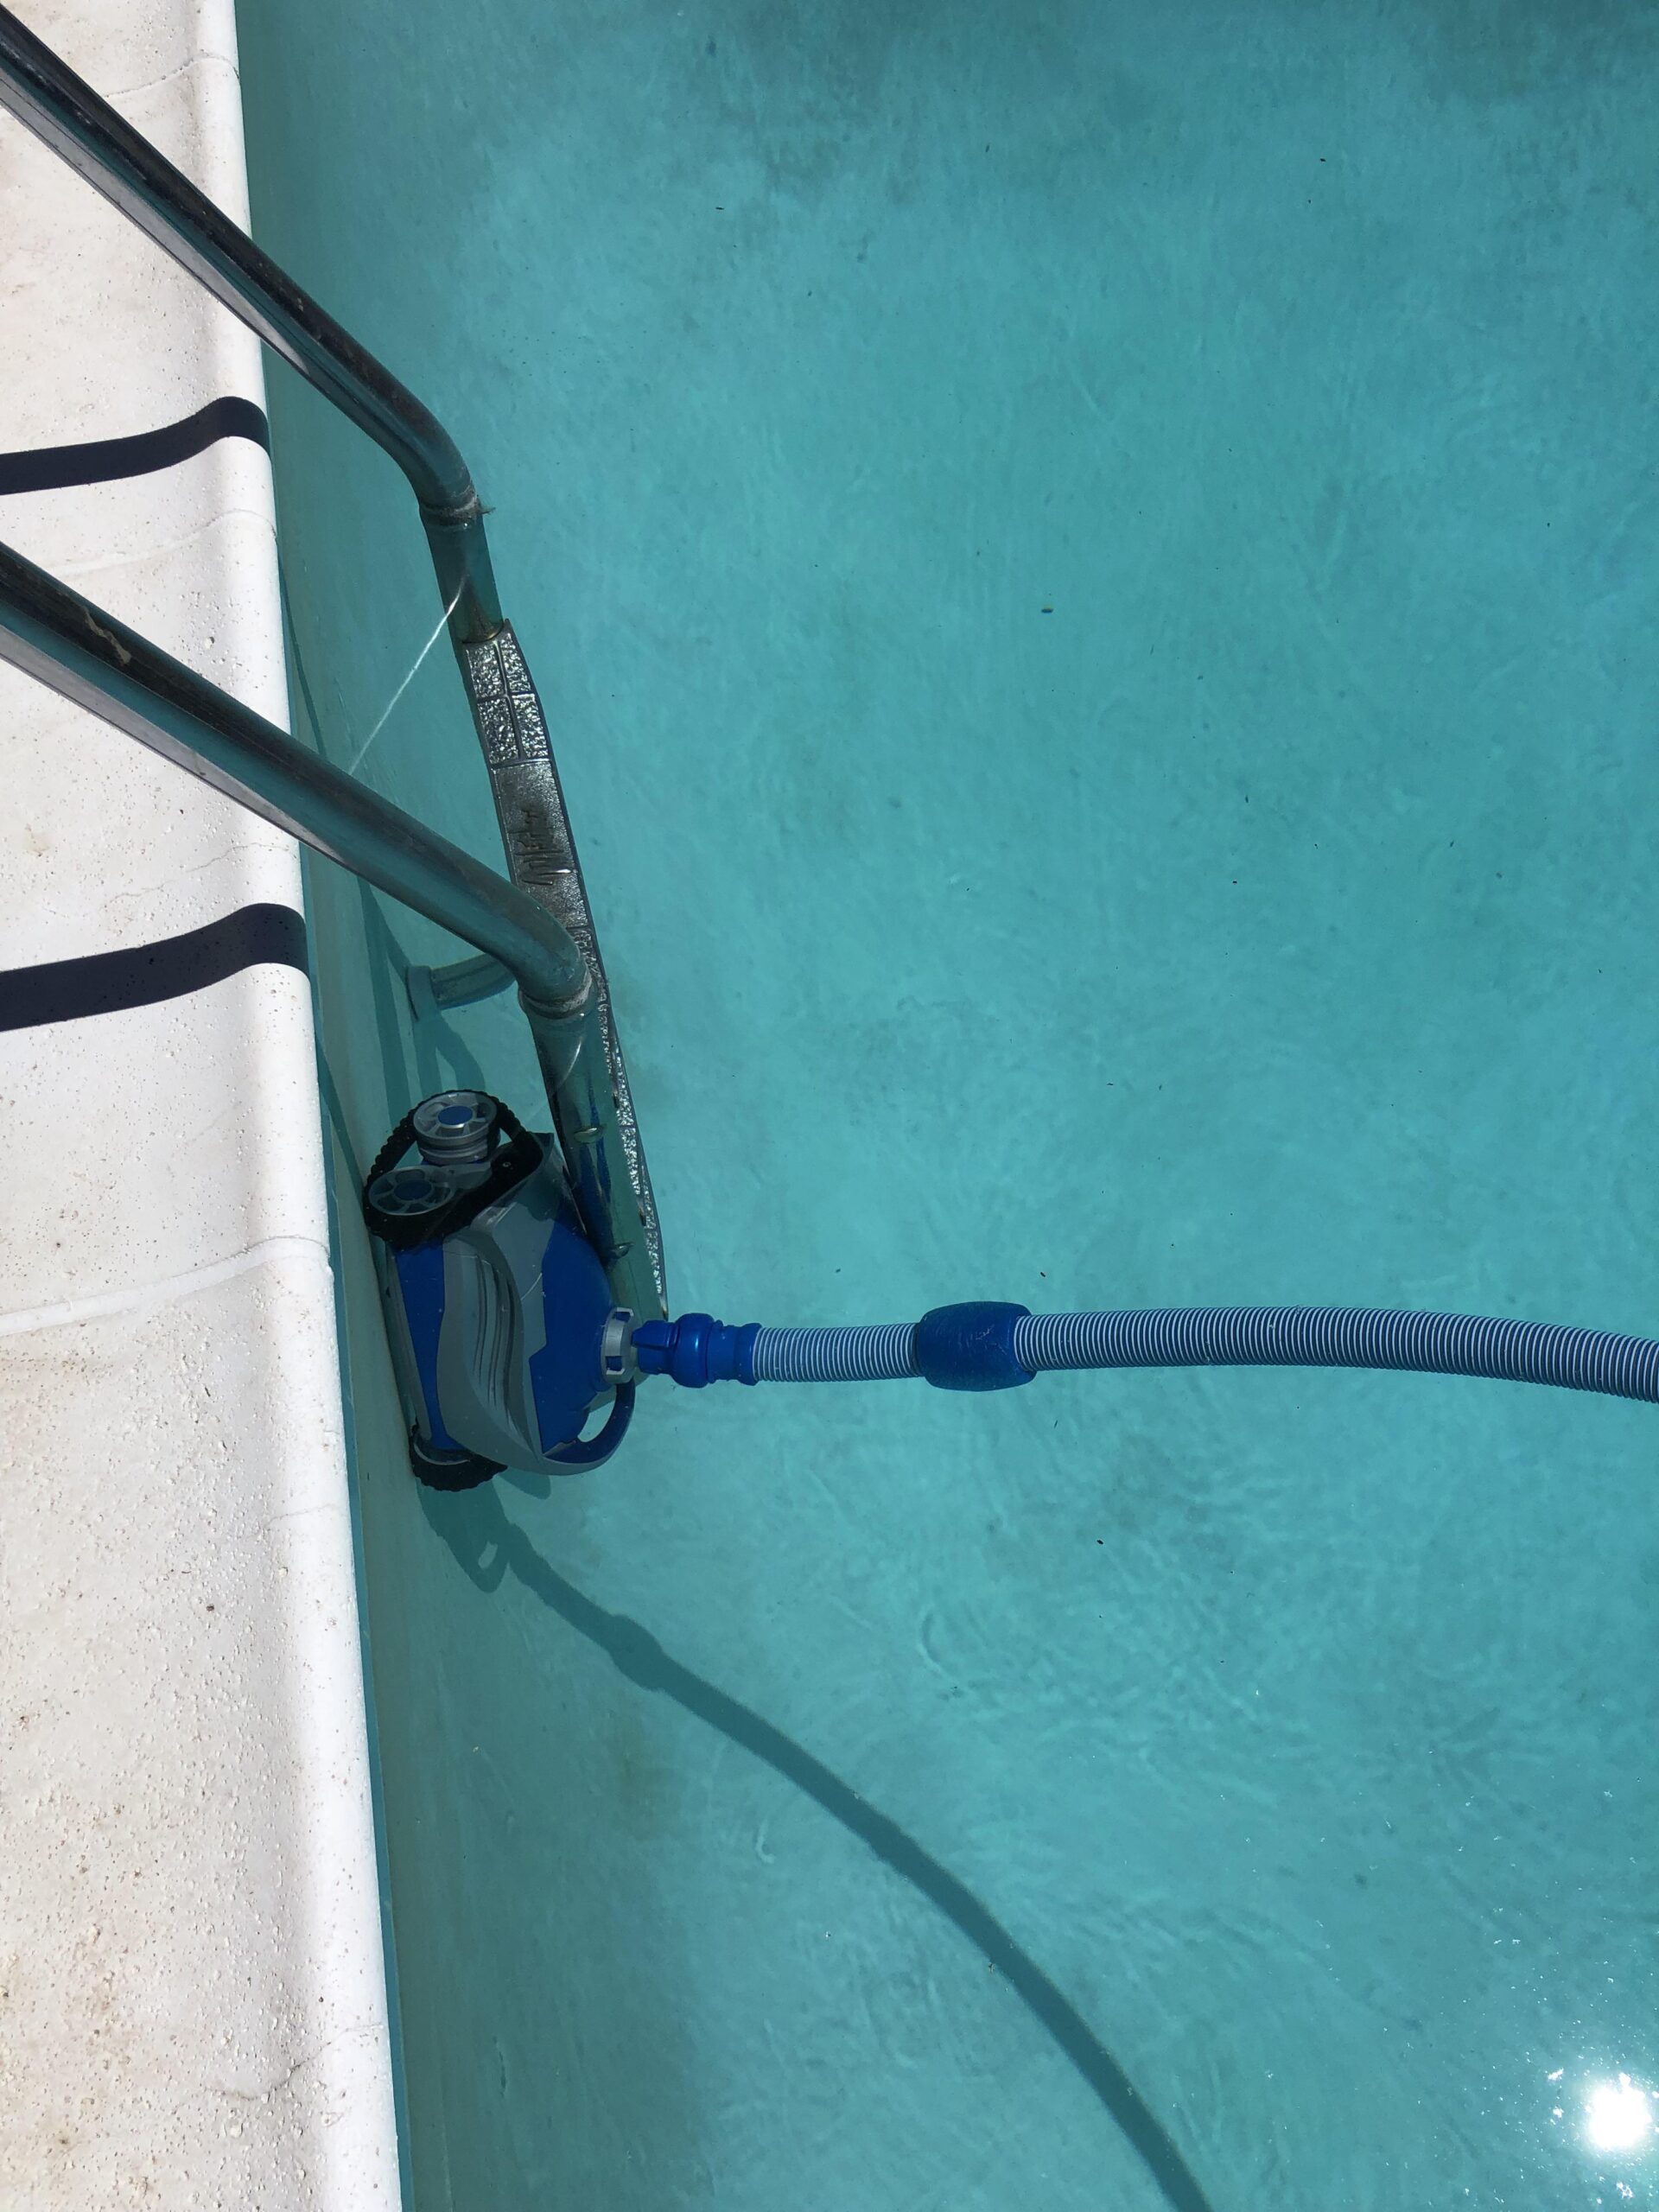 How to Keep Pool Vacuum from Getting Stuck on Ladder